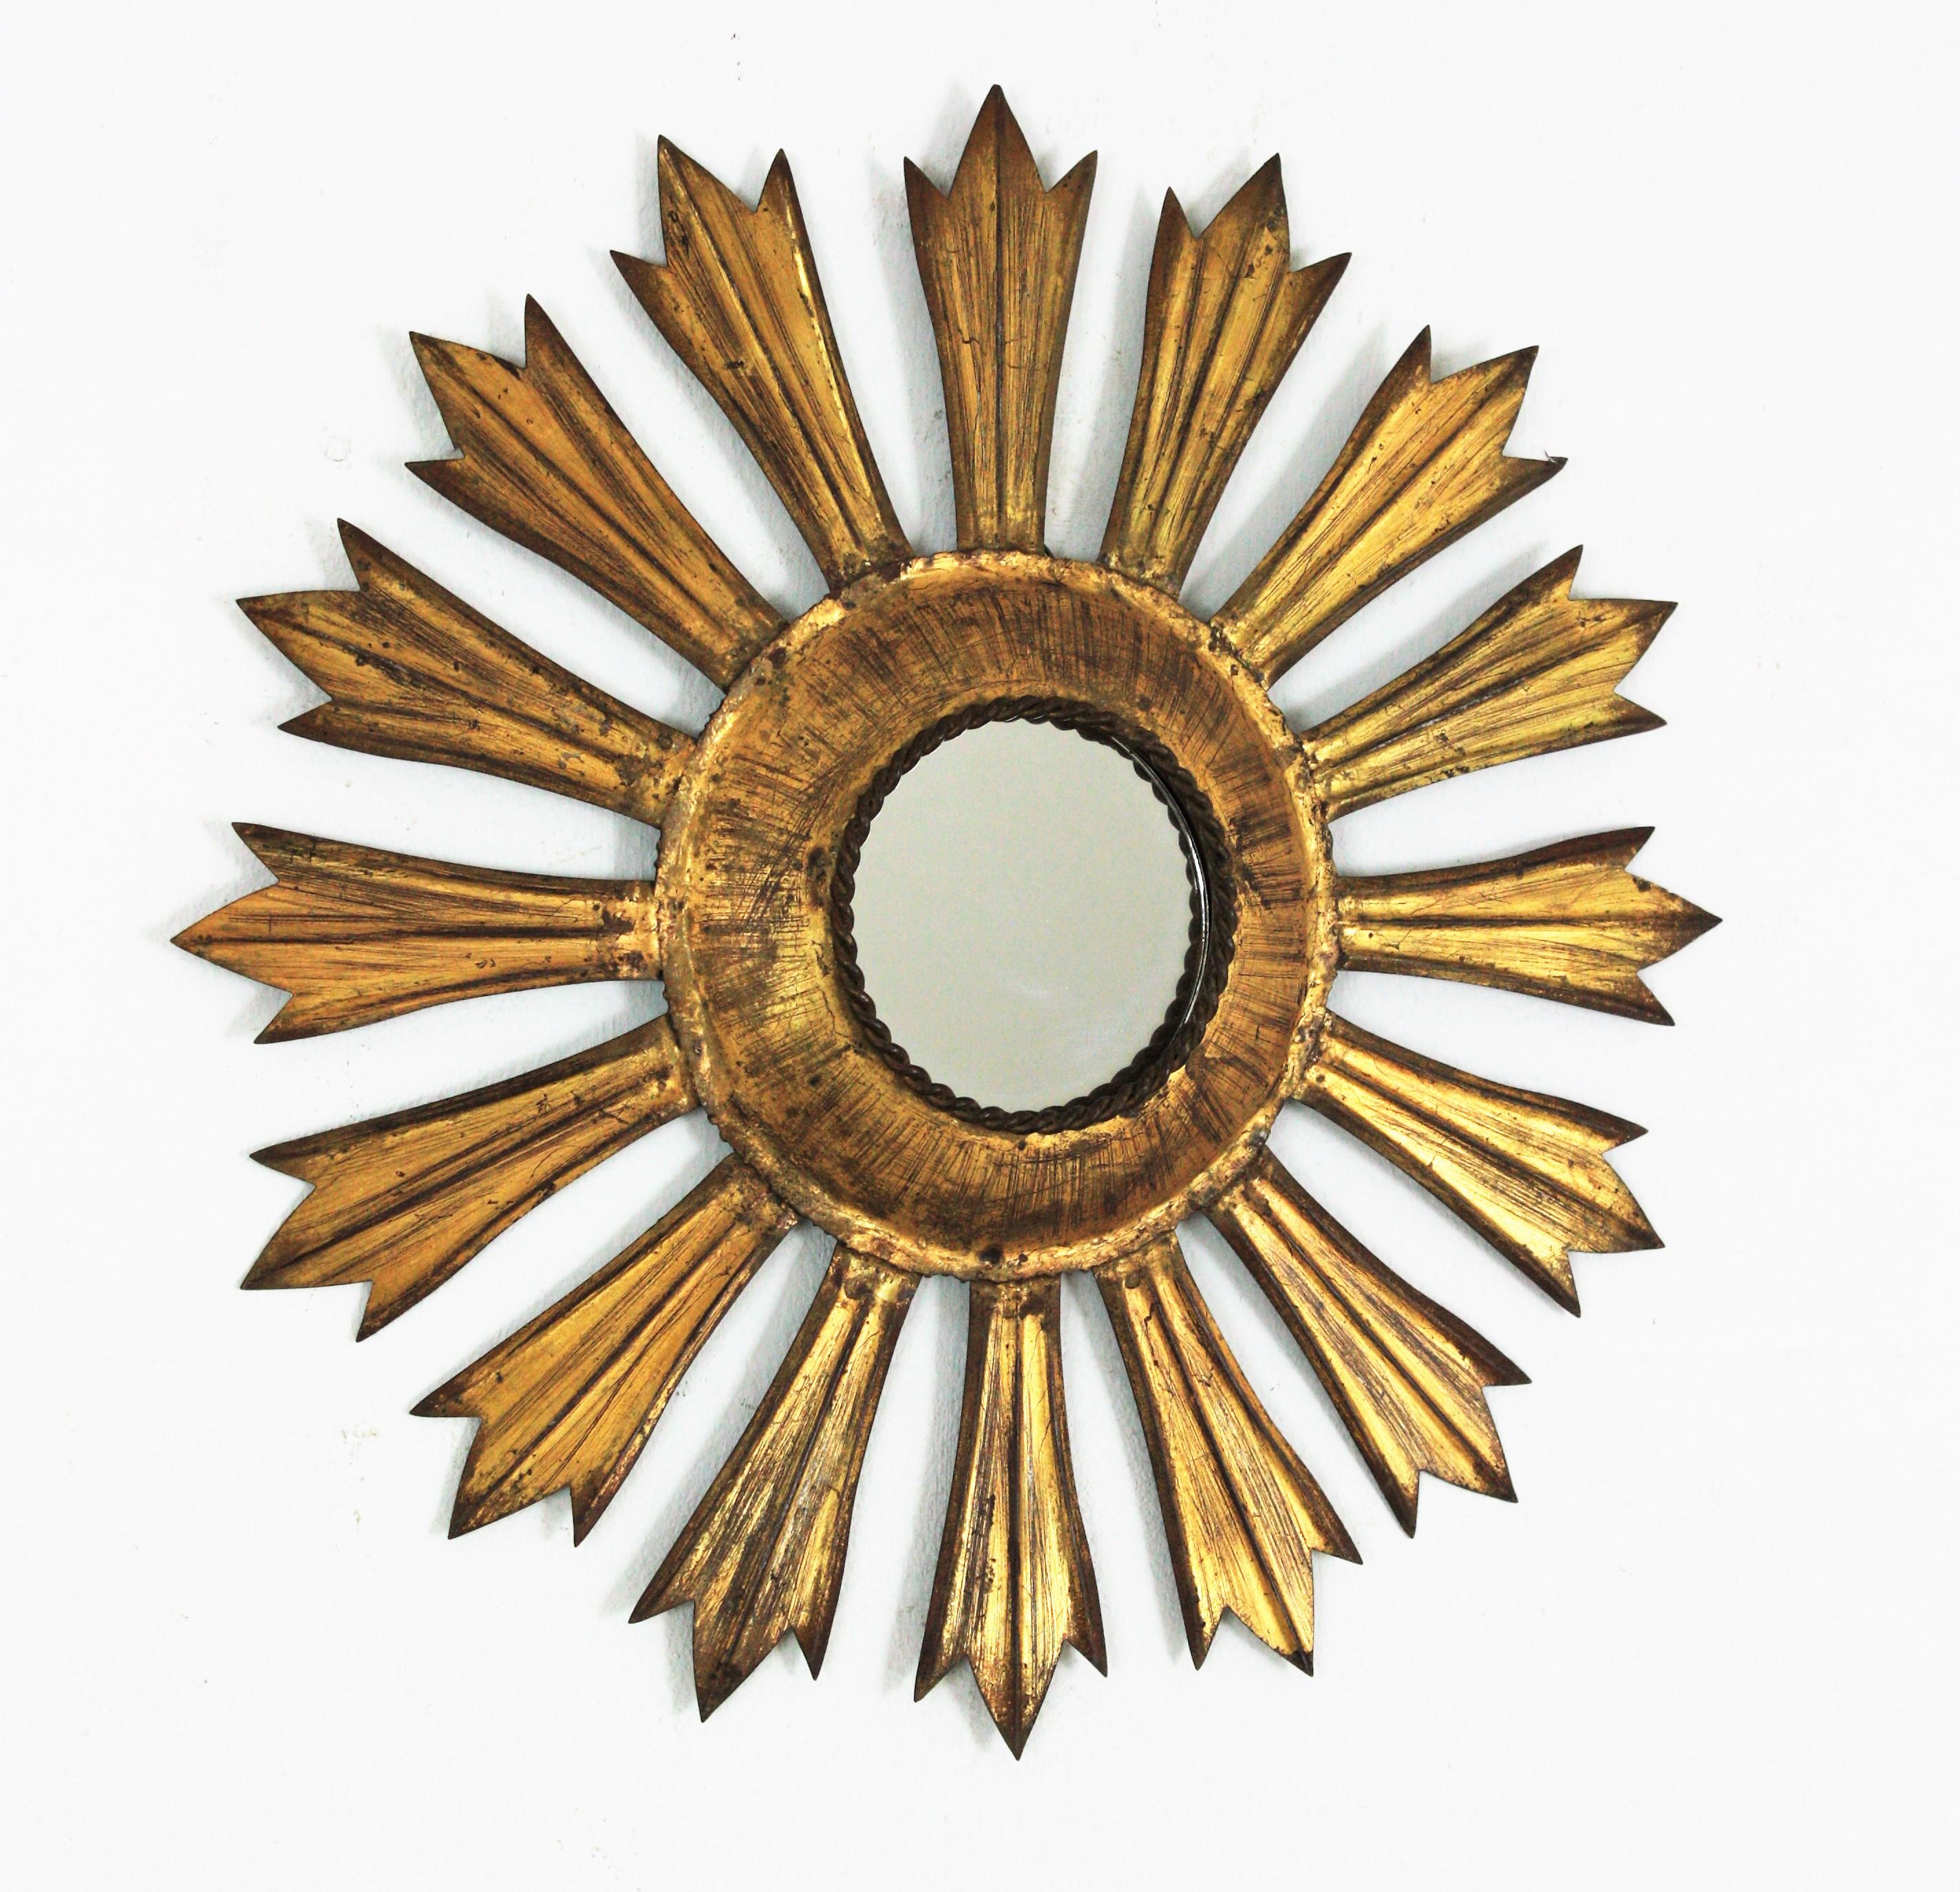 Starburst sunburst wall mirror, Iron, gold leaf, France, 1940s.
This eye-catching handcrafted gilt metal sunburst mirror has a frame with hand cut iron rays surrounding a central small round glass.
It has a terrific patina showing its original